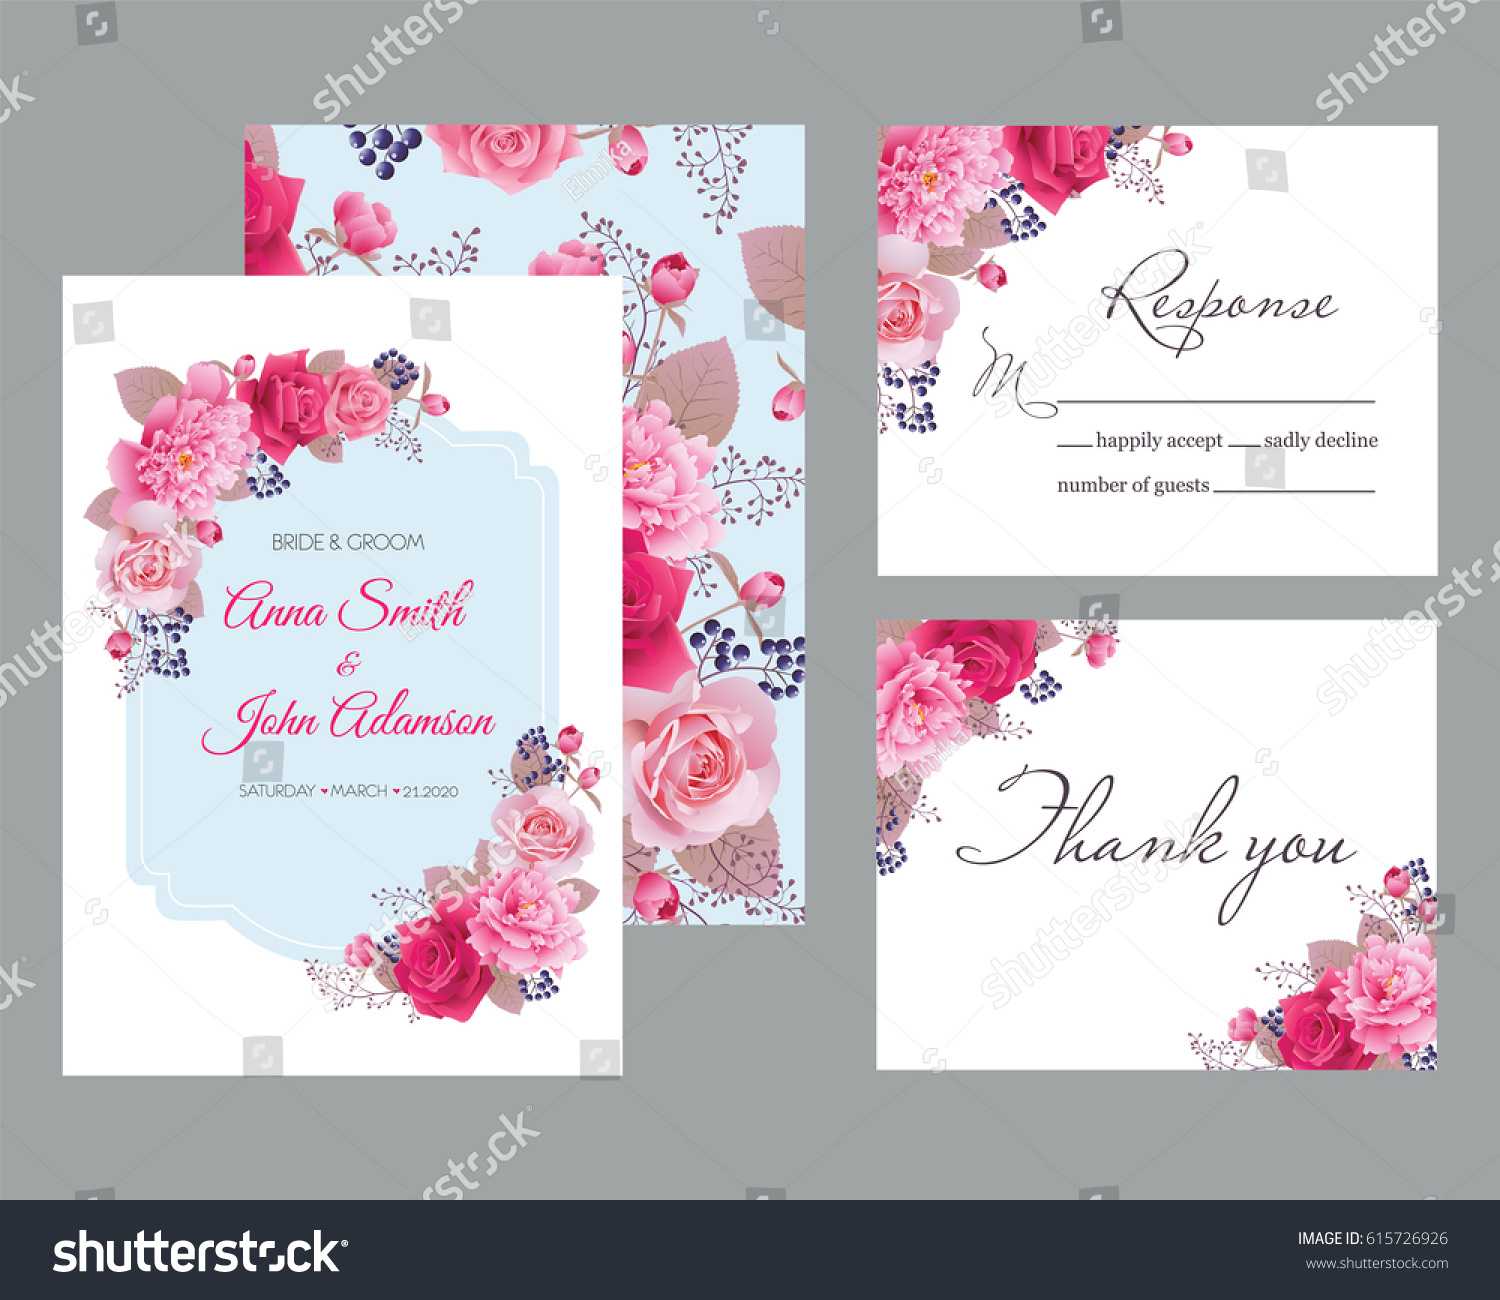 Wedding Acceptance Template Free ] – Wedding Invitations With Acceptance Card Template